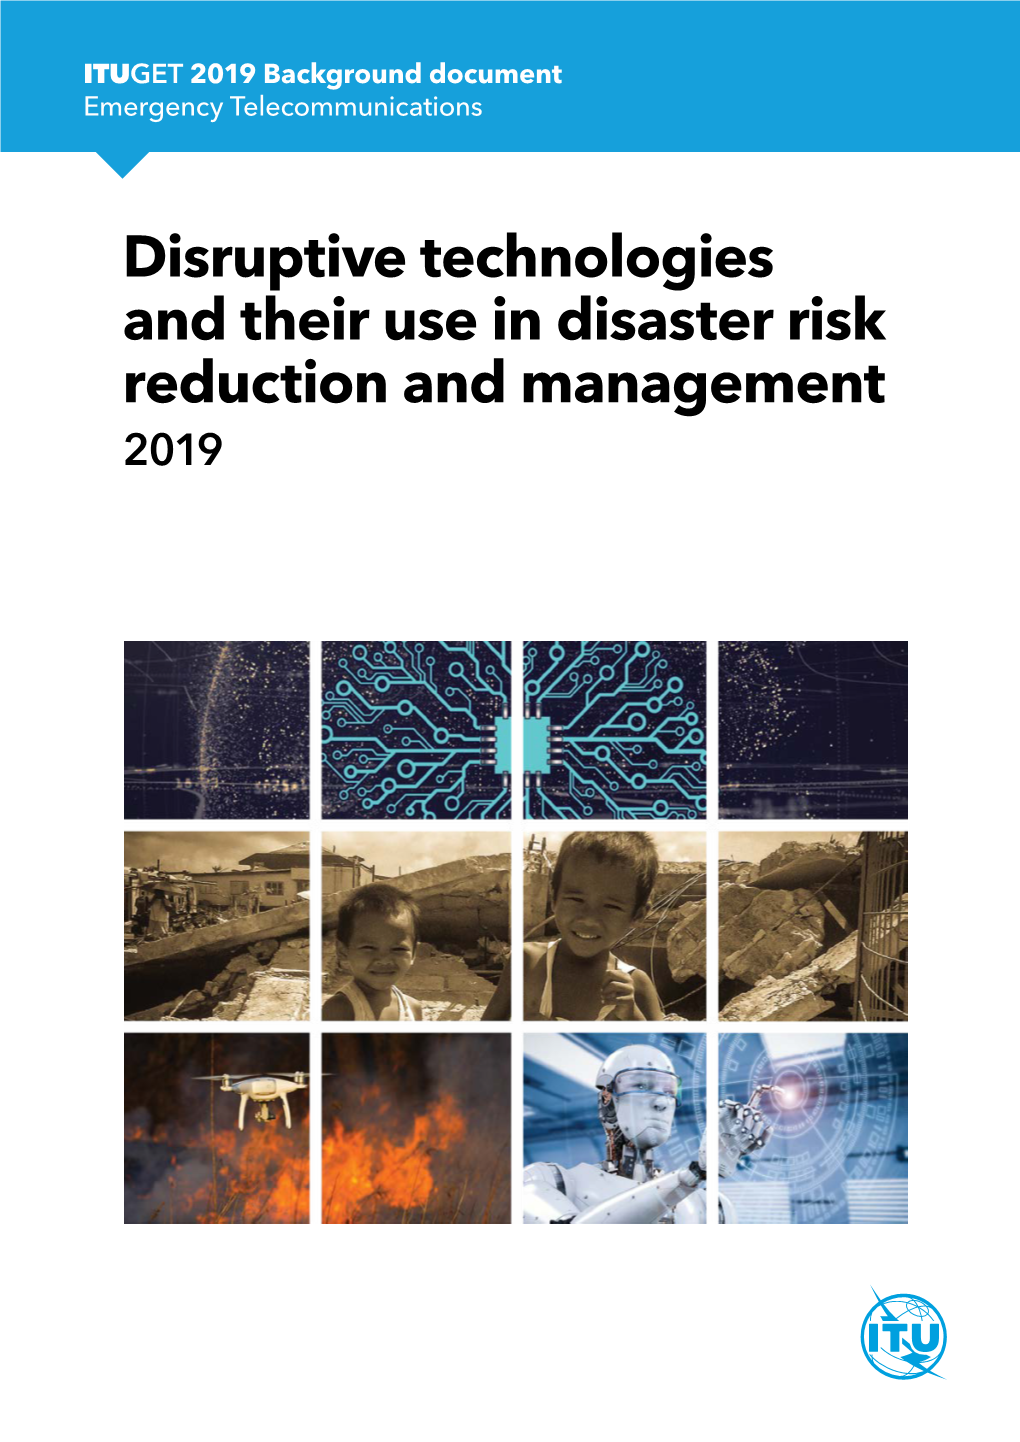 Disruptive Technologies and Their Use in Disaster Risk Reduction and Management